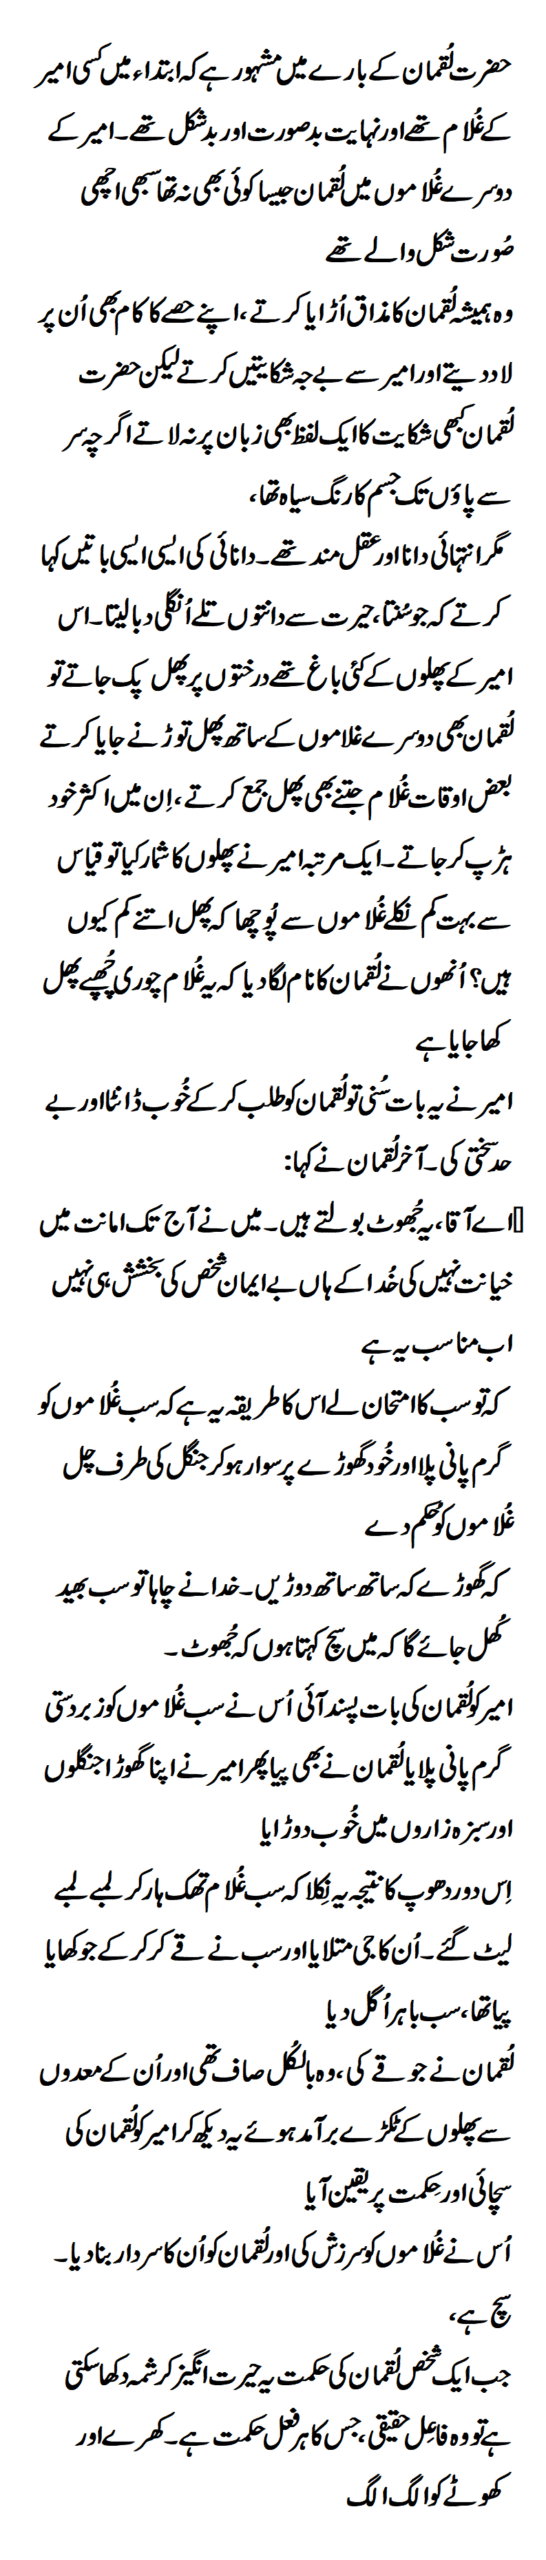 It is known about Hazrat Luqman that in the beginning he was a slave of a rich man